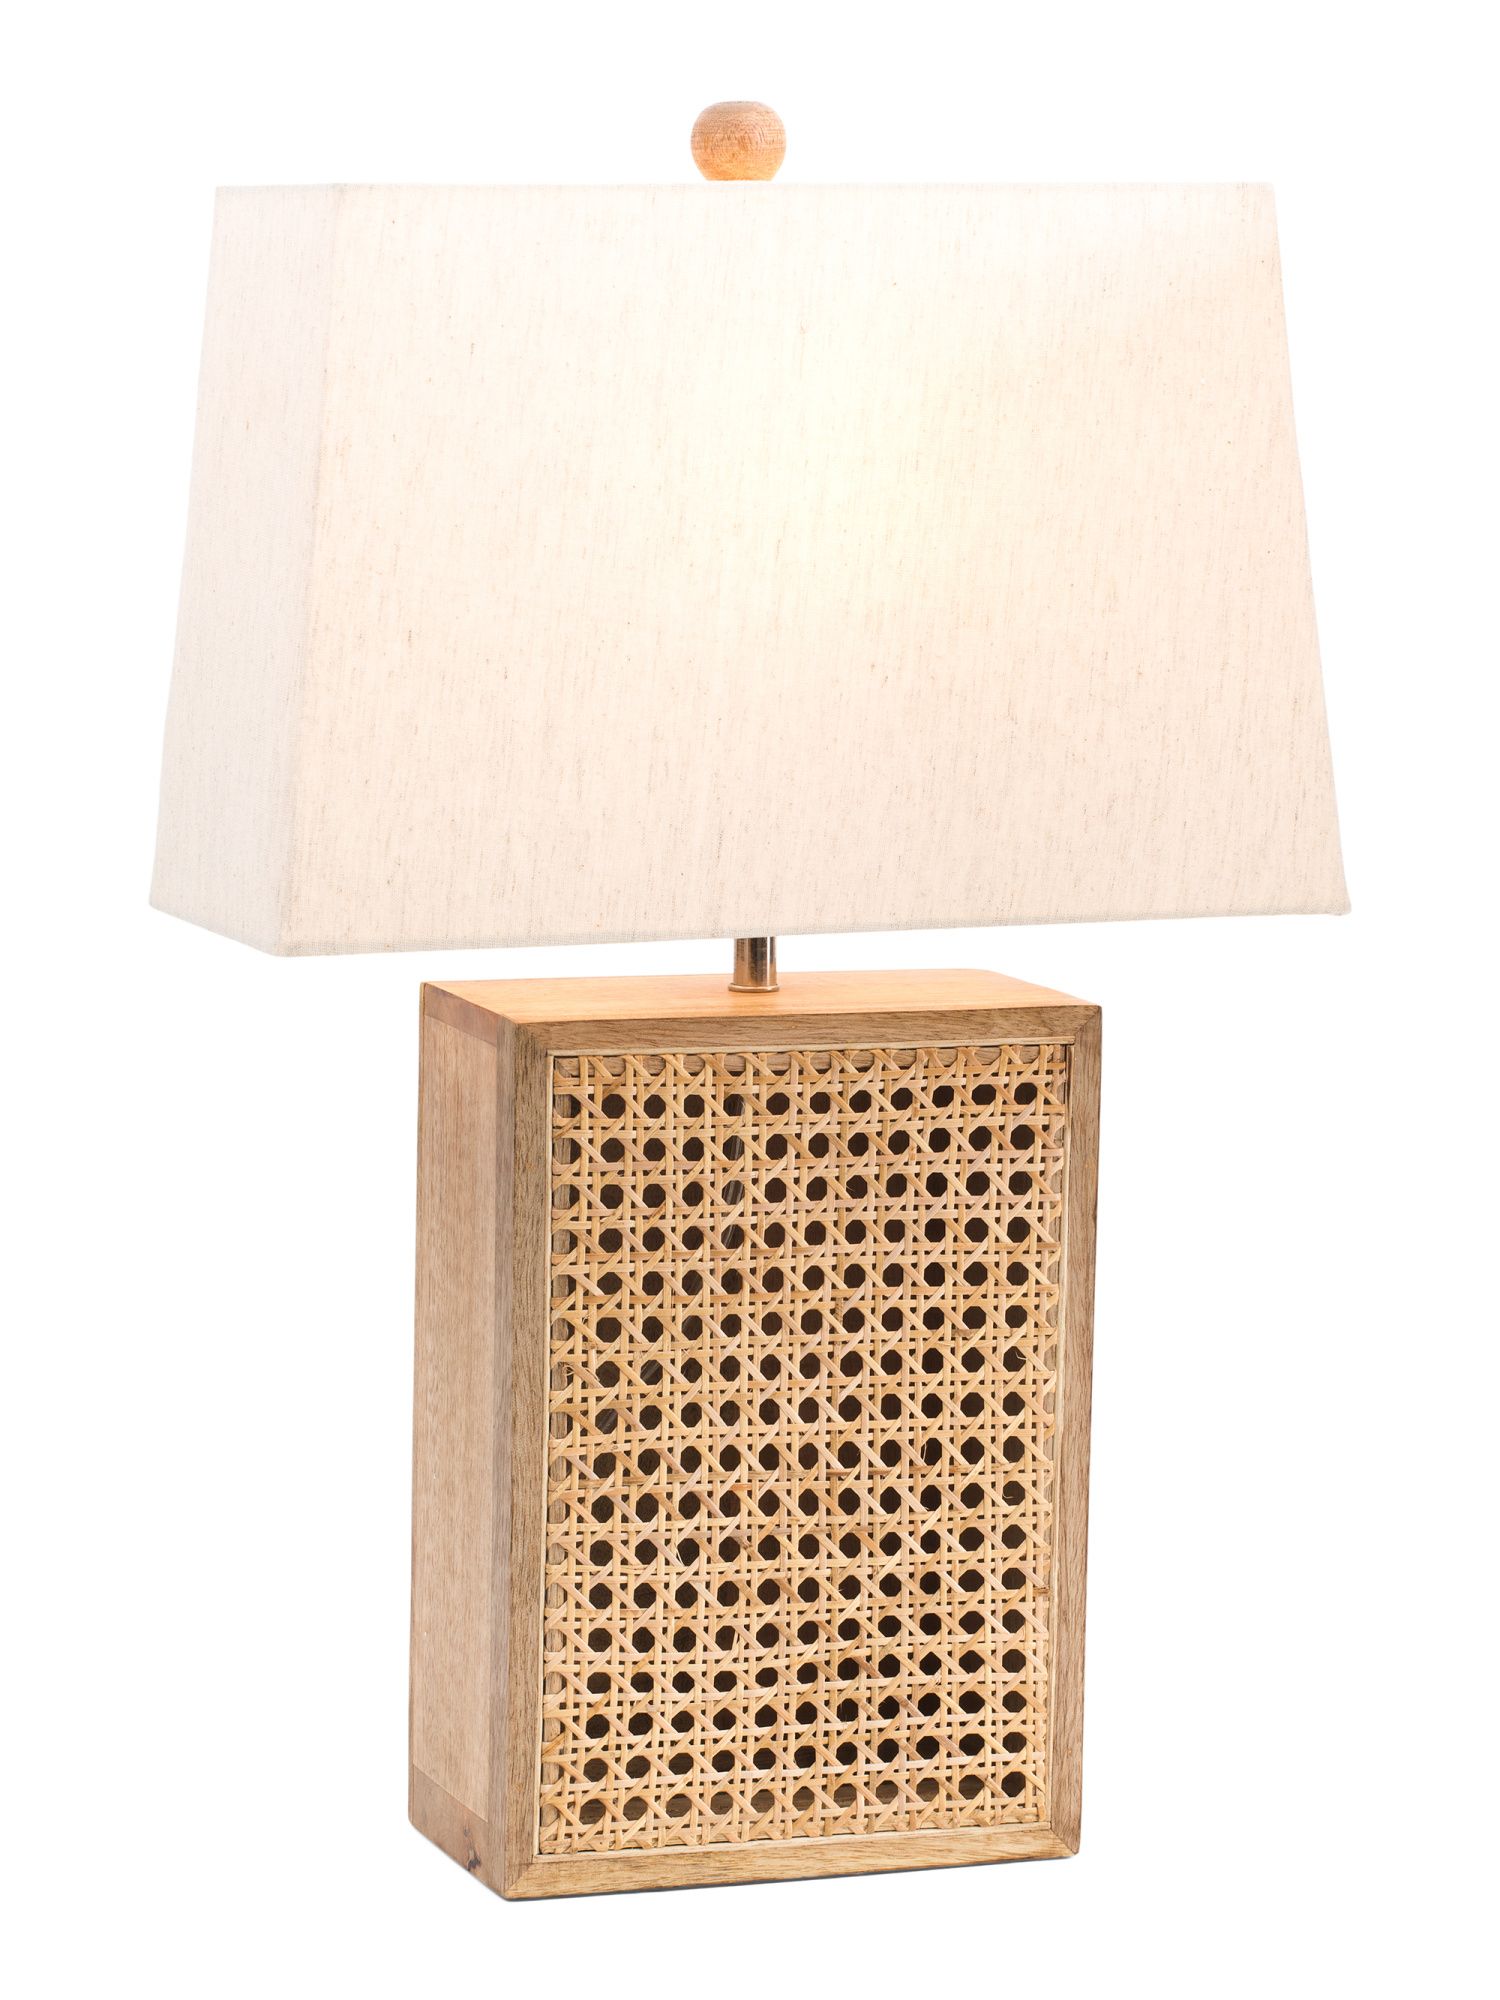 Cane And Wood Table Lamp | TJ Maxx